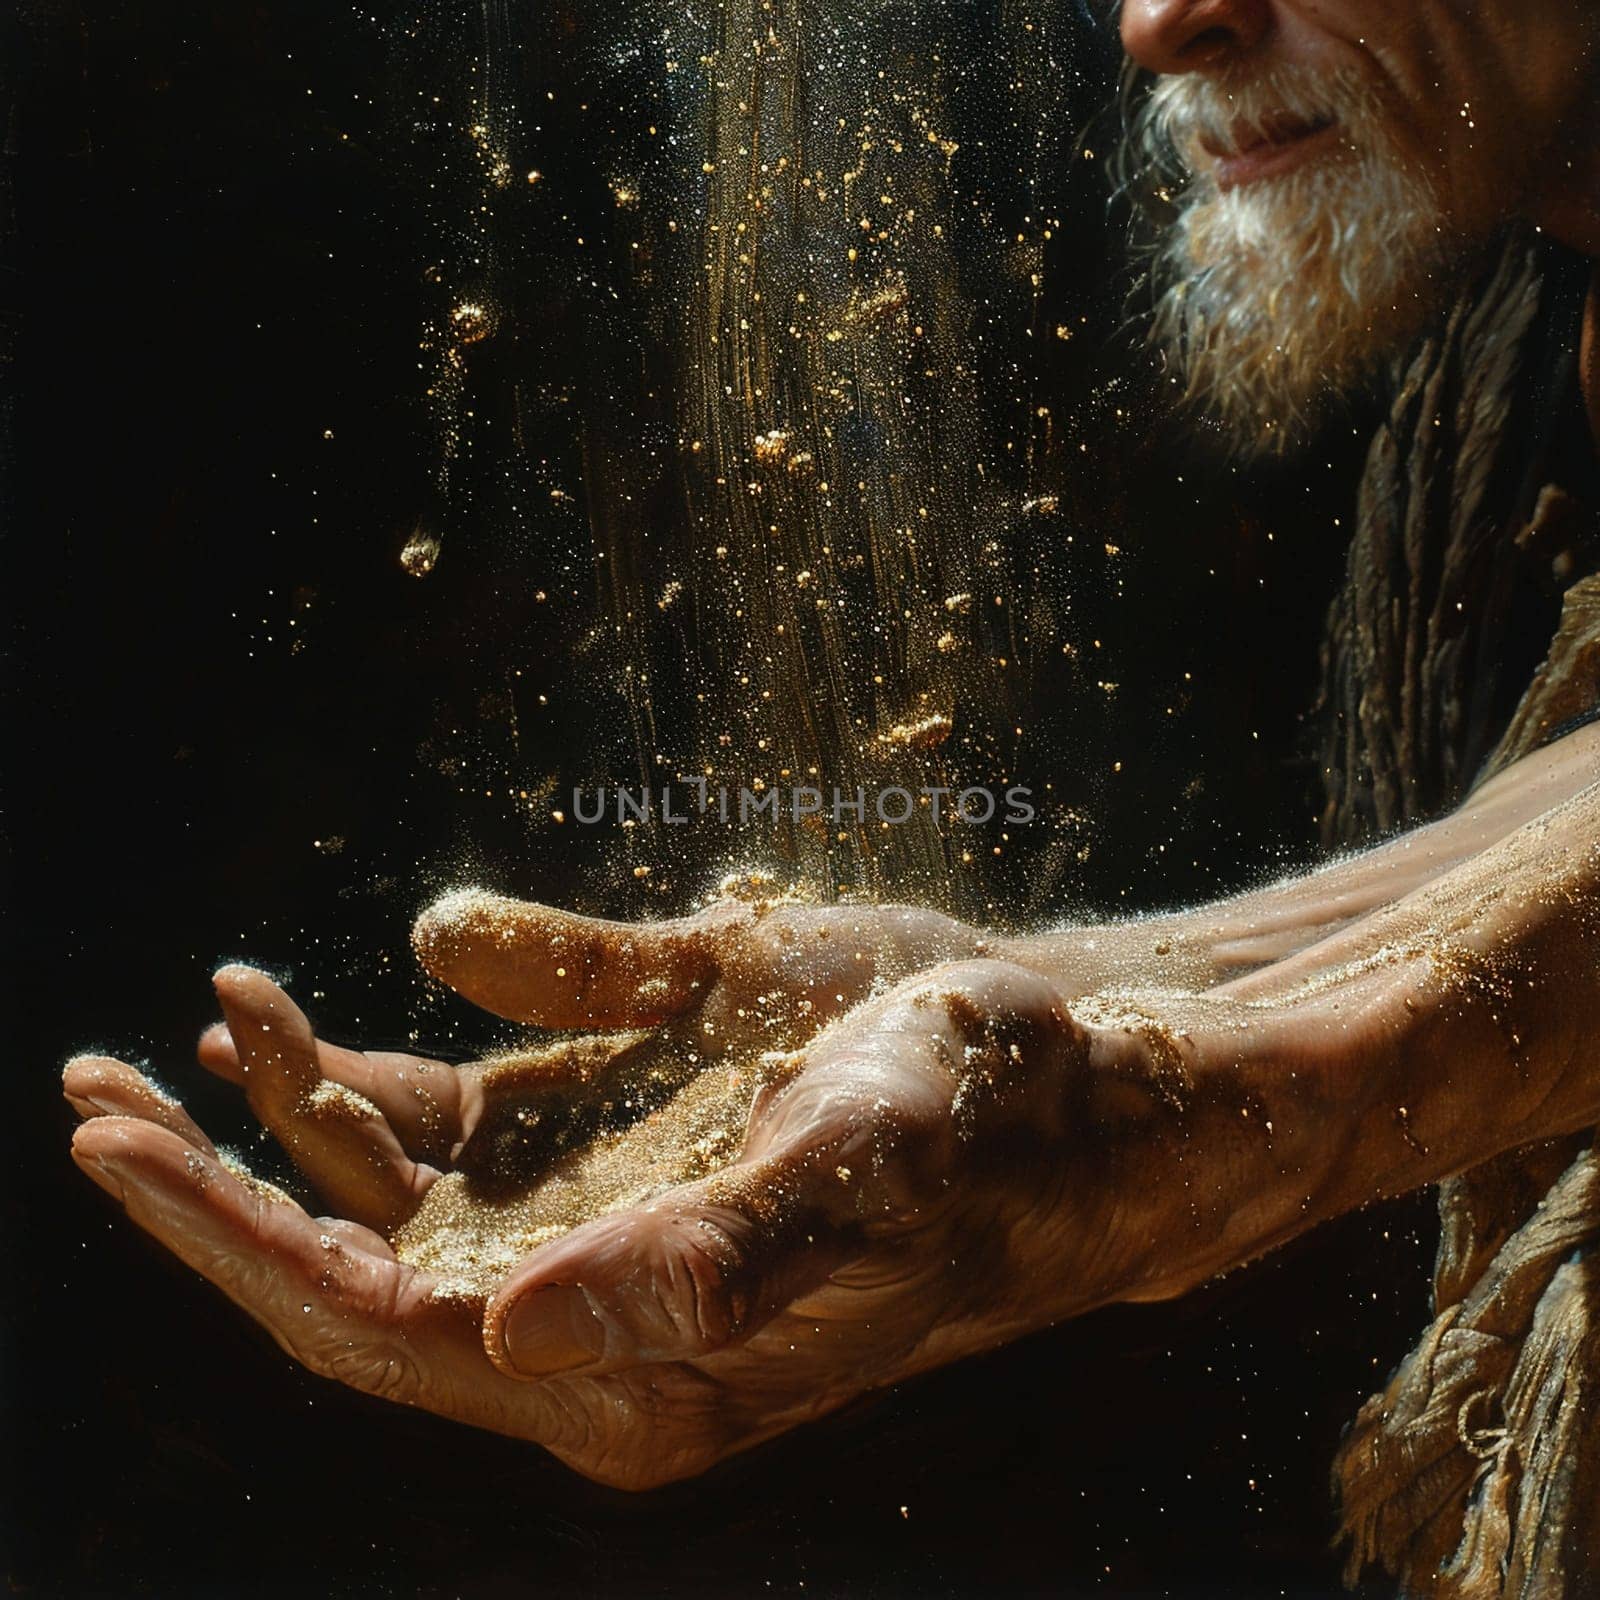 Close-up of a hand pouring sand through fingers, symbolizing time, loss, and impermanence.